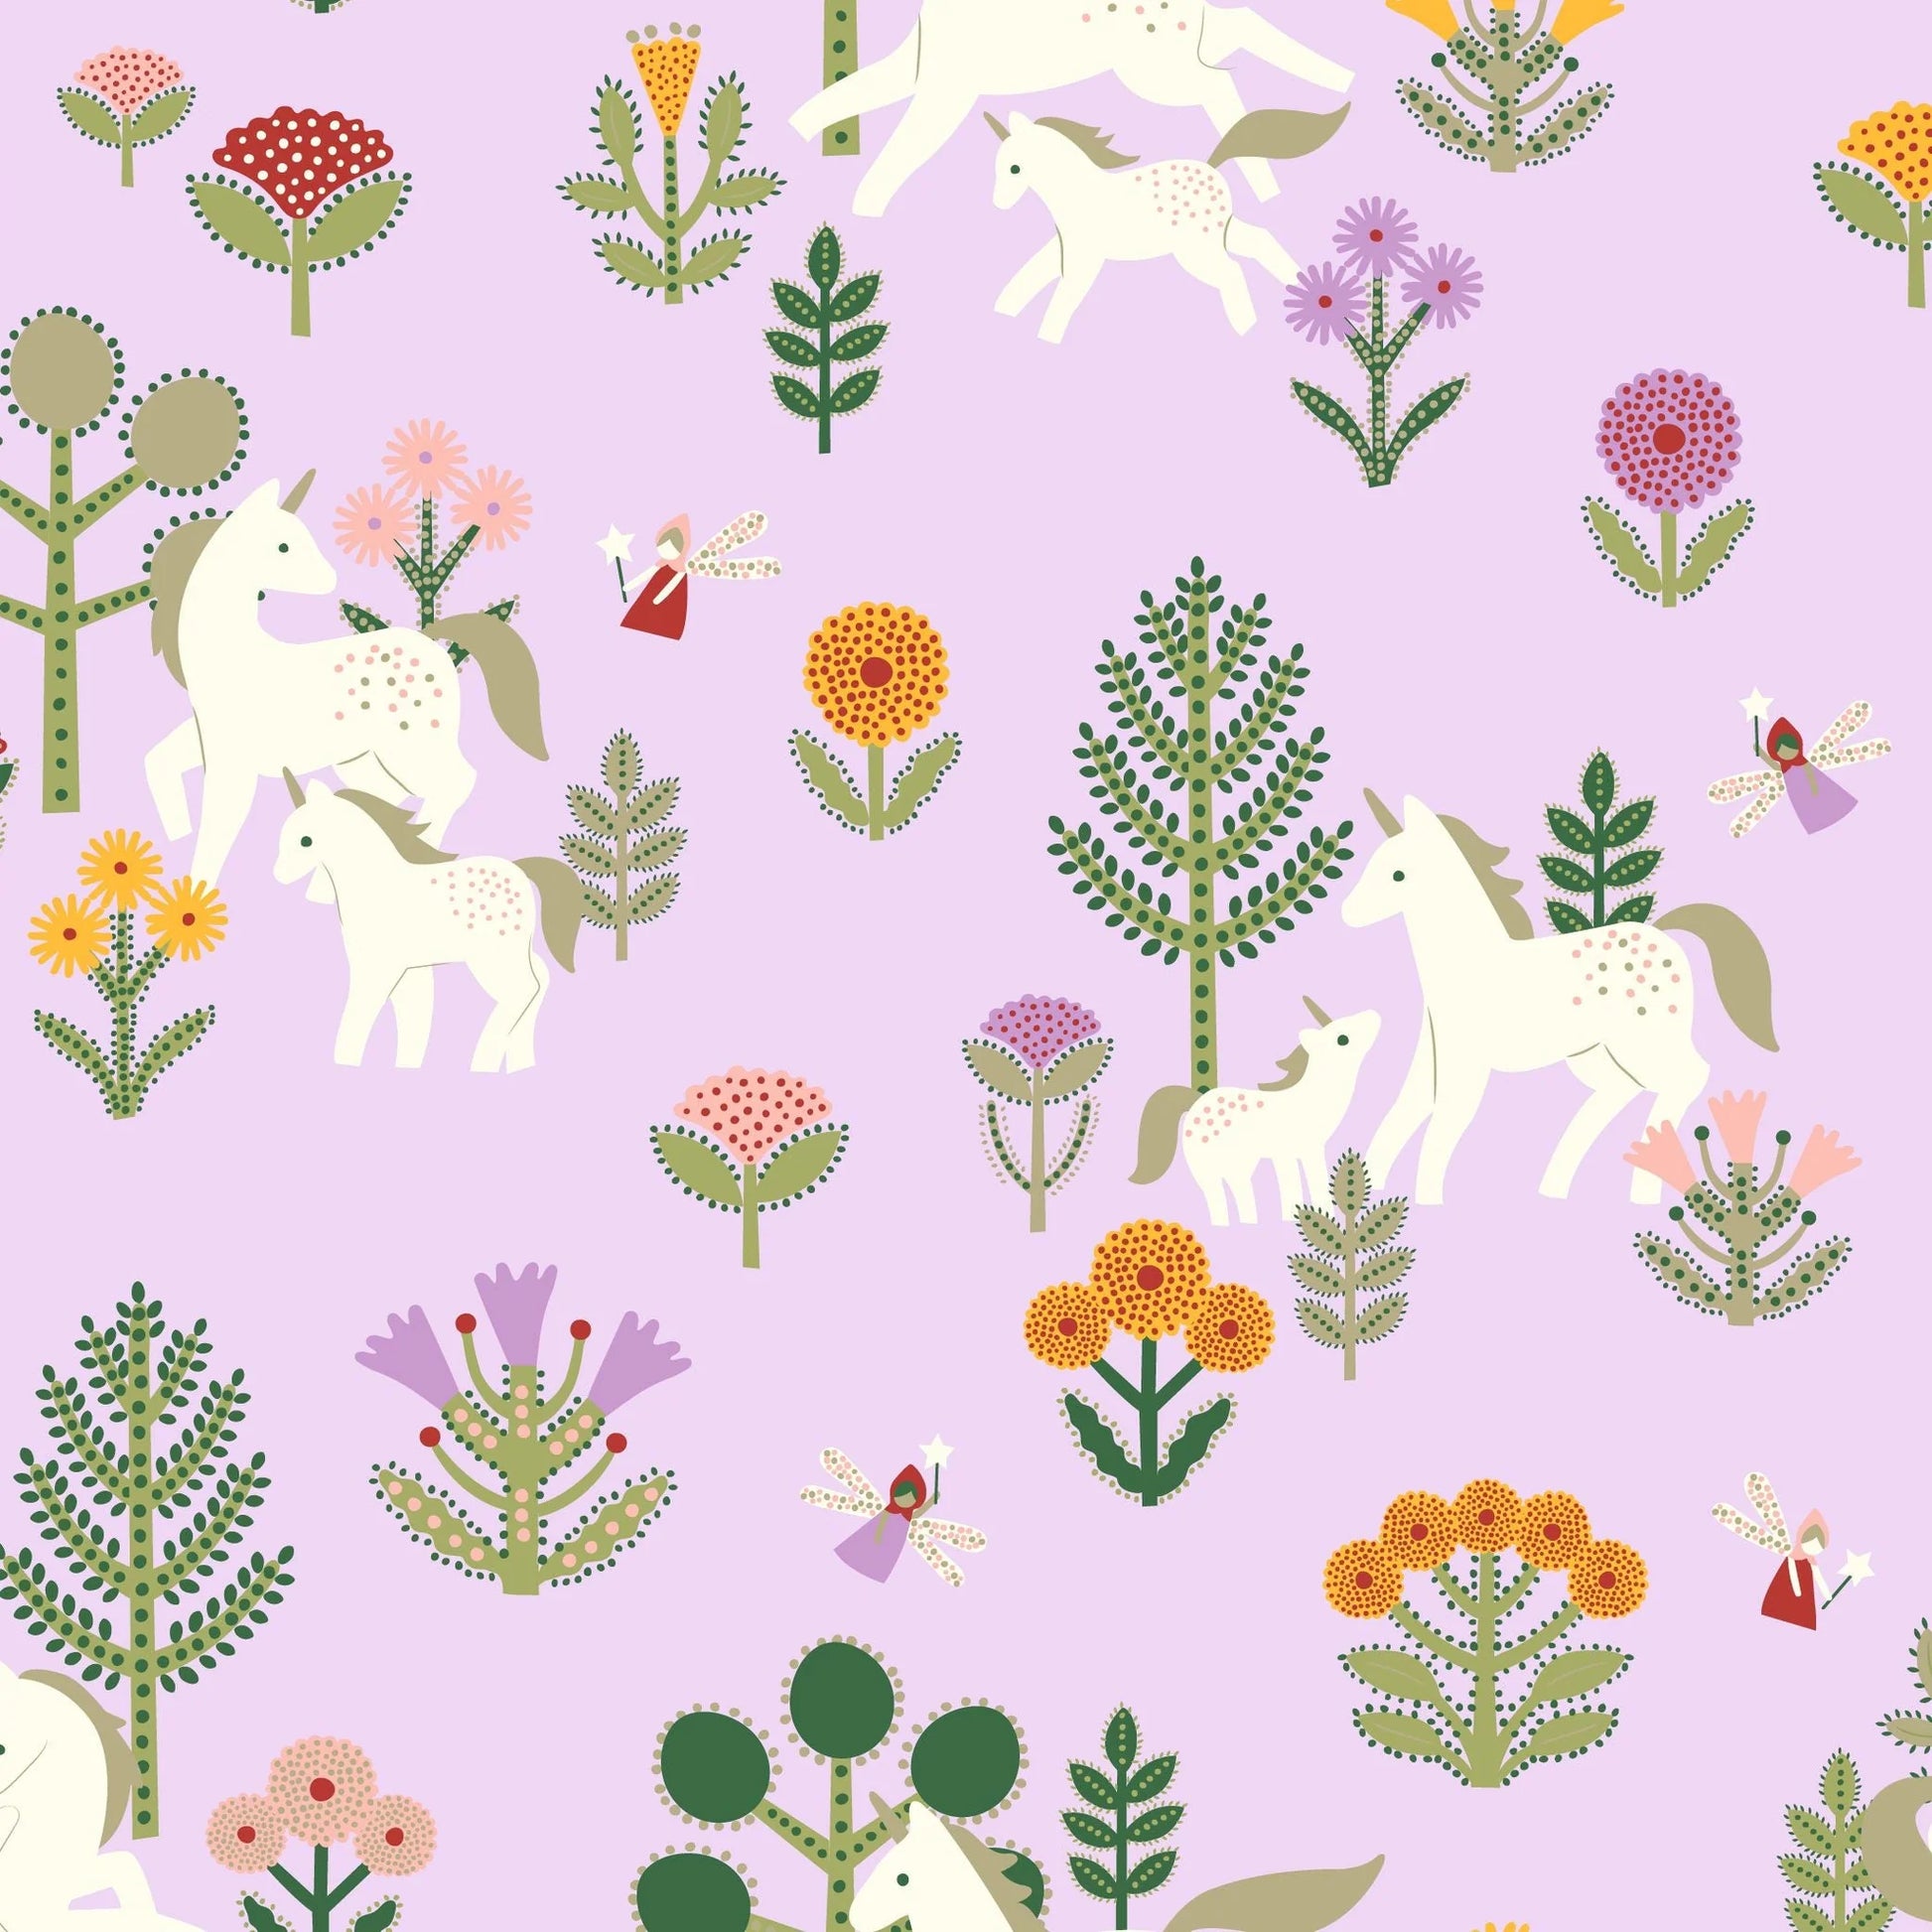 Unicorns and flowers on a purple background made from GOTS certified organic cotton. (Folk Magic Footie by Magnetic Me!)